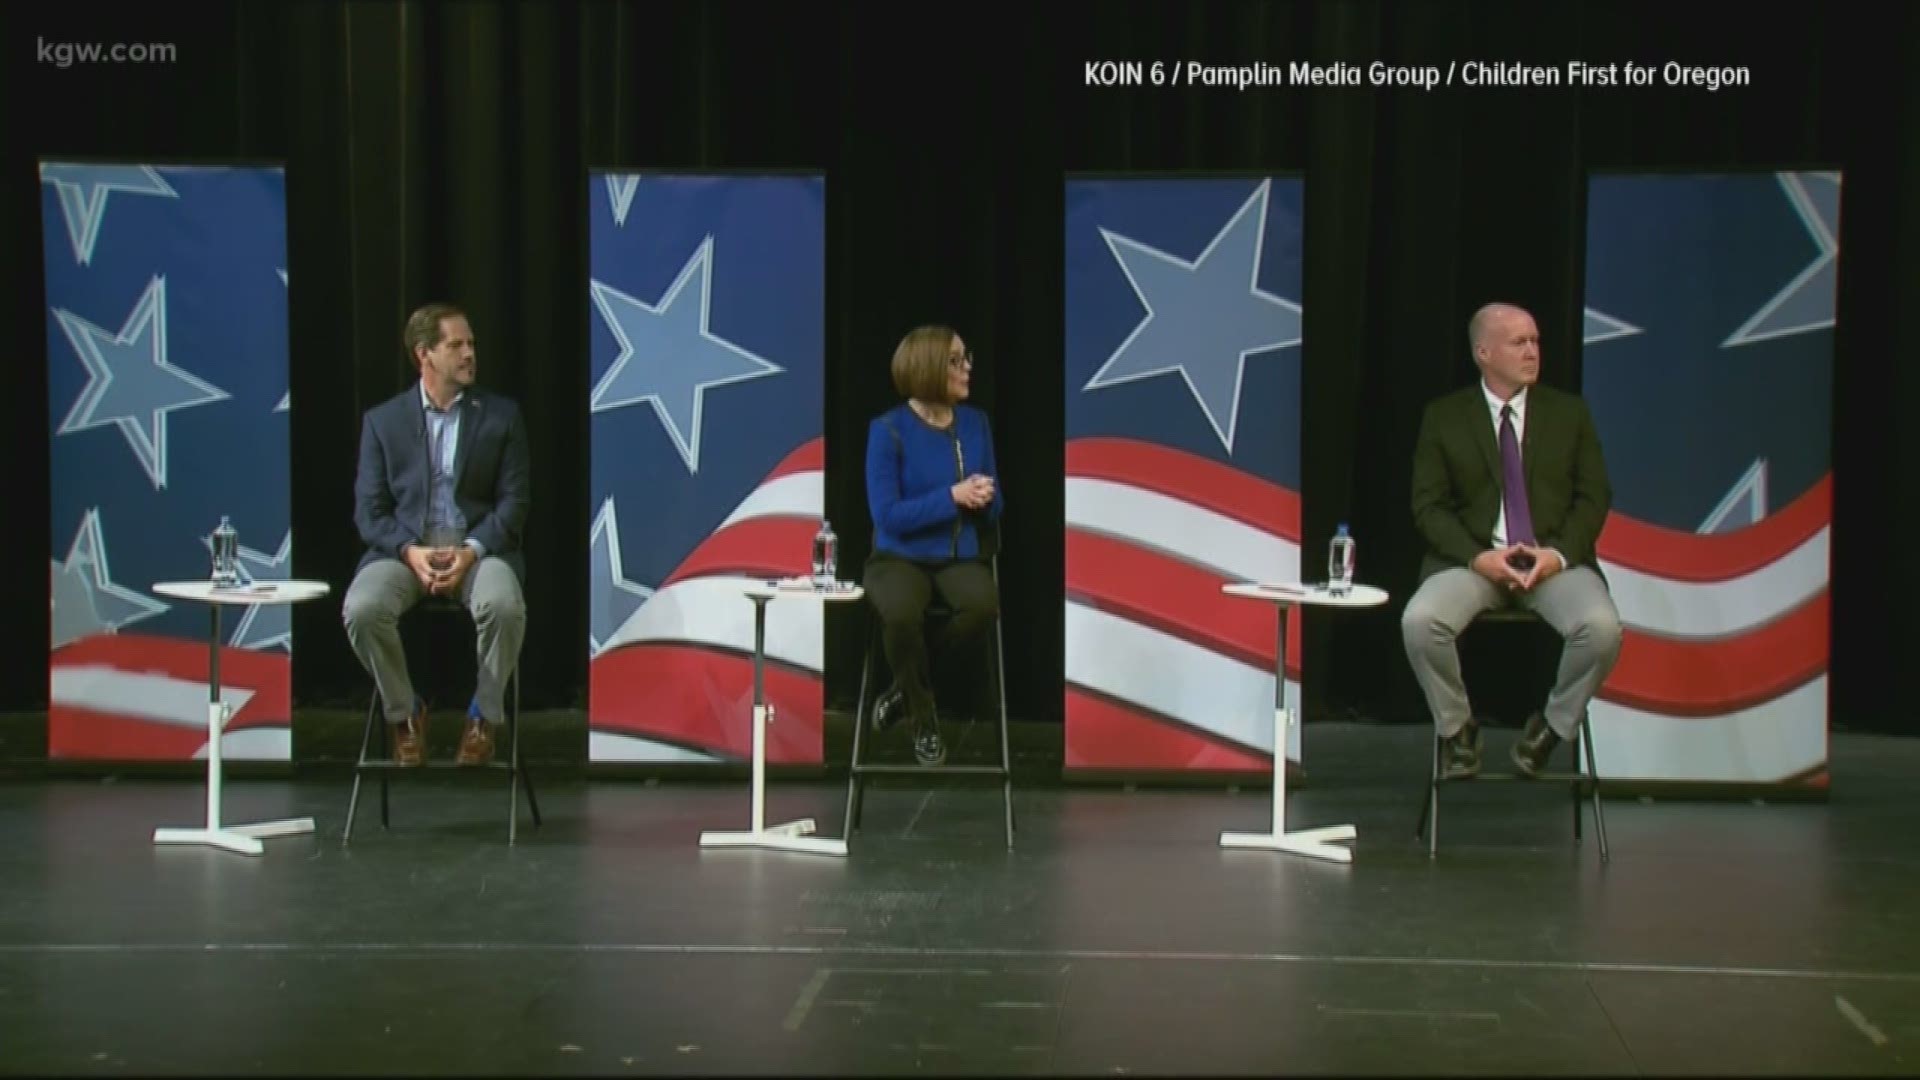 The first Oregon gubernatorial debate had candidates answer questions from students. 